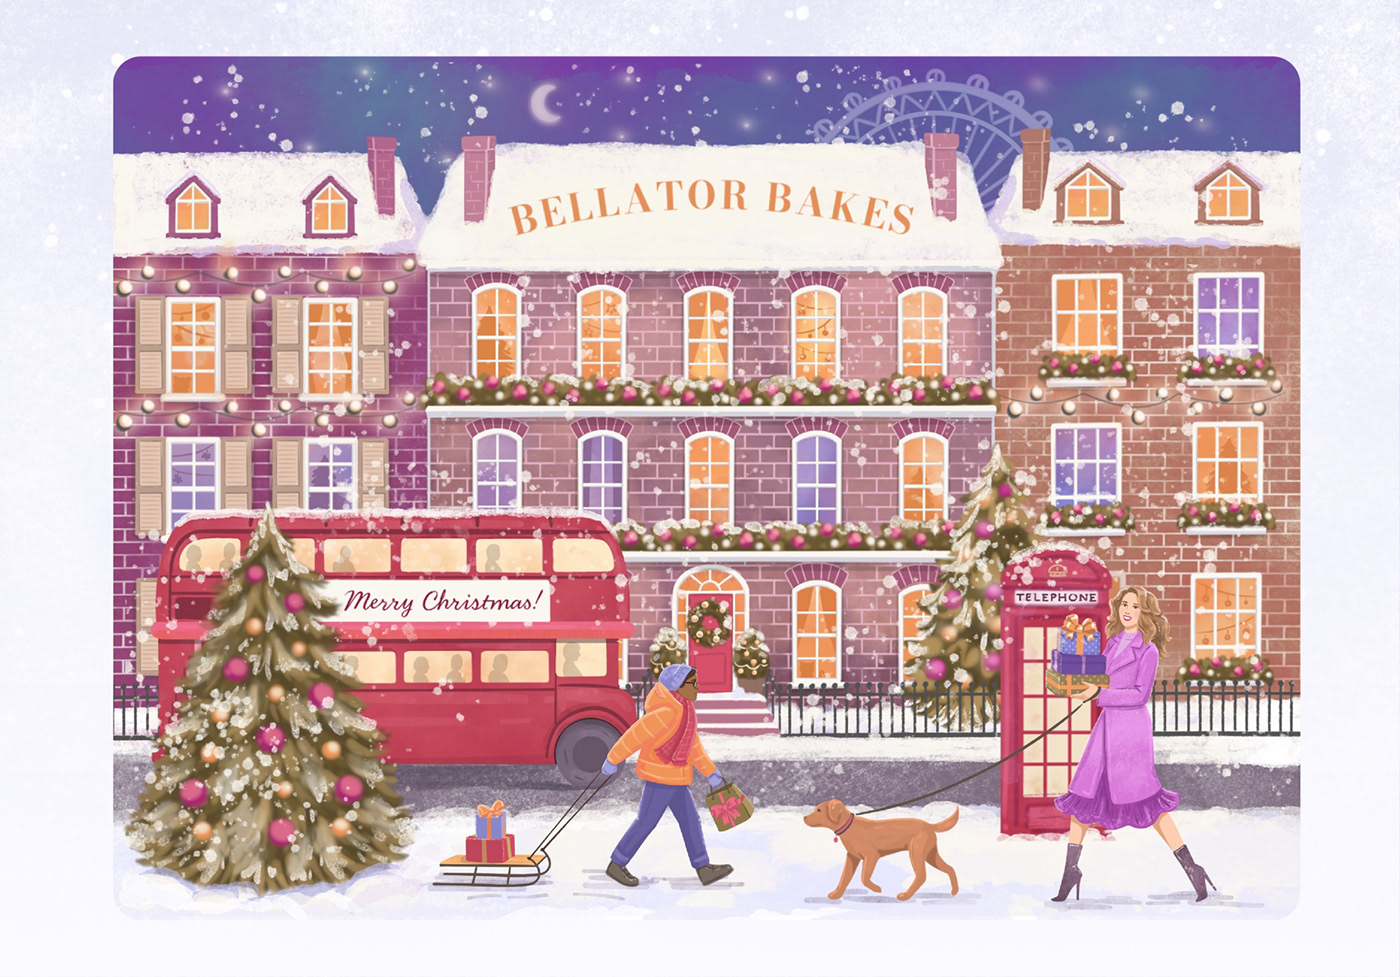 Christmas packaging illustration of London, United Kingdom
For bakery, chocolate and cookies shop
